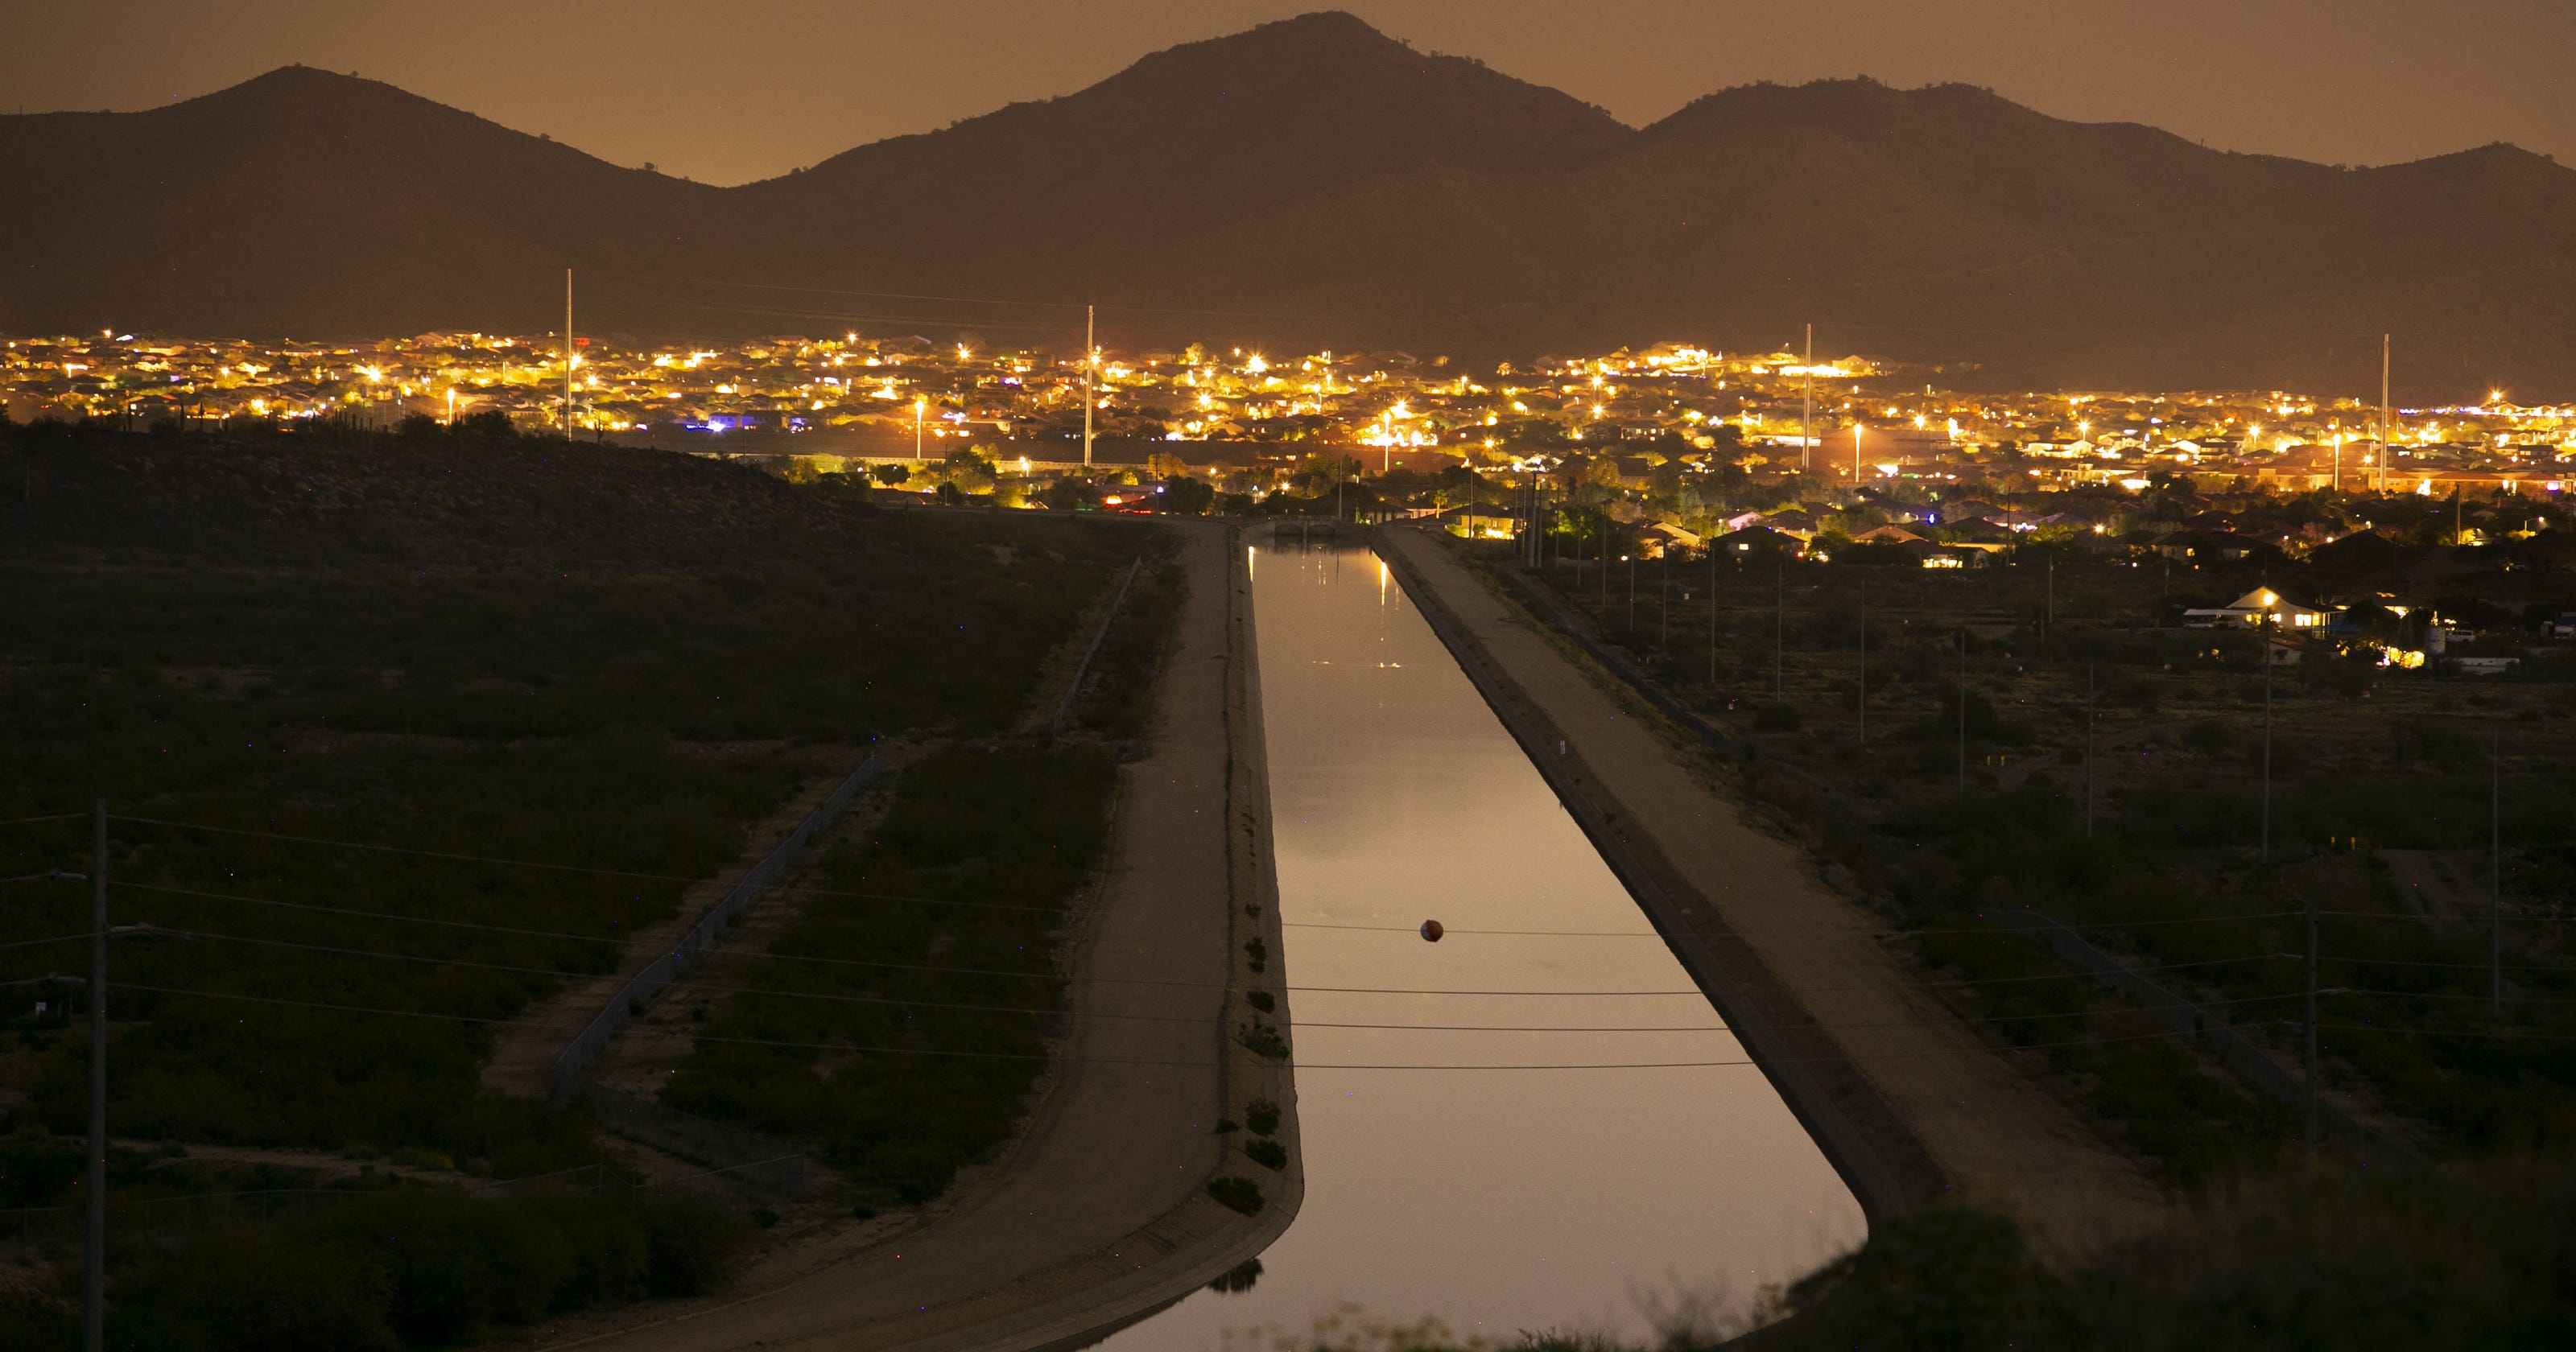 Does Arizona really use less water now than it did in 1957?